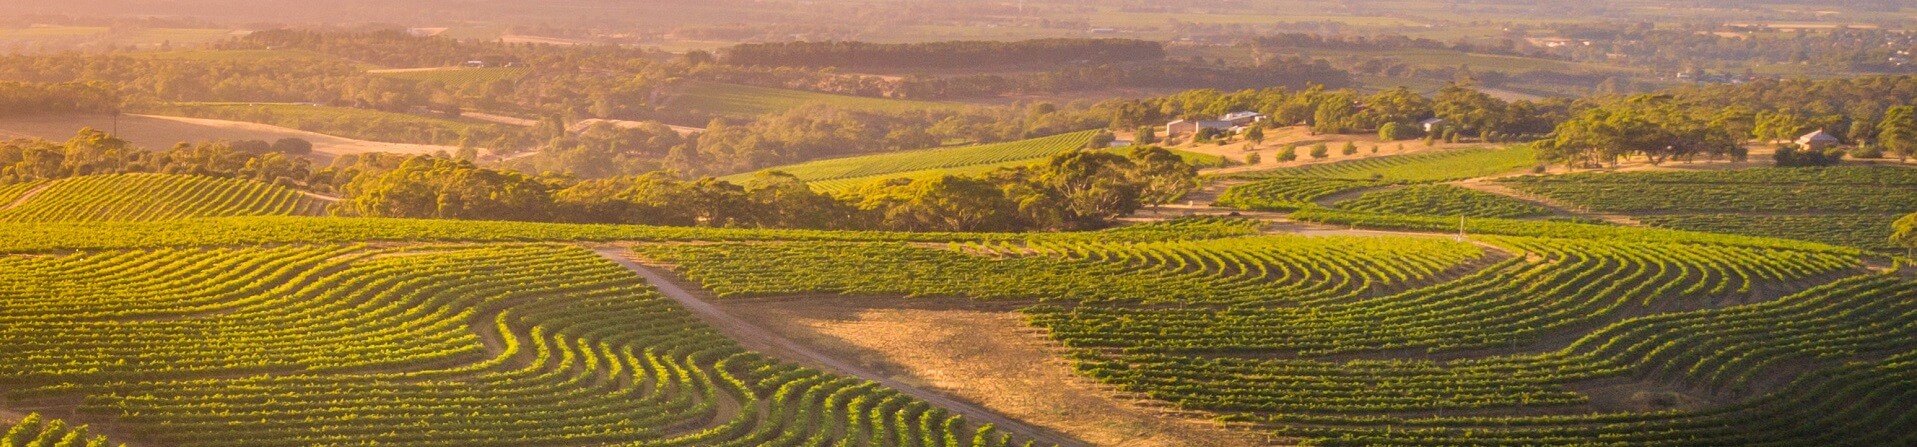 What wineries are in McLaren Vale?